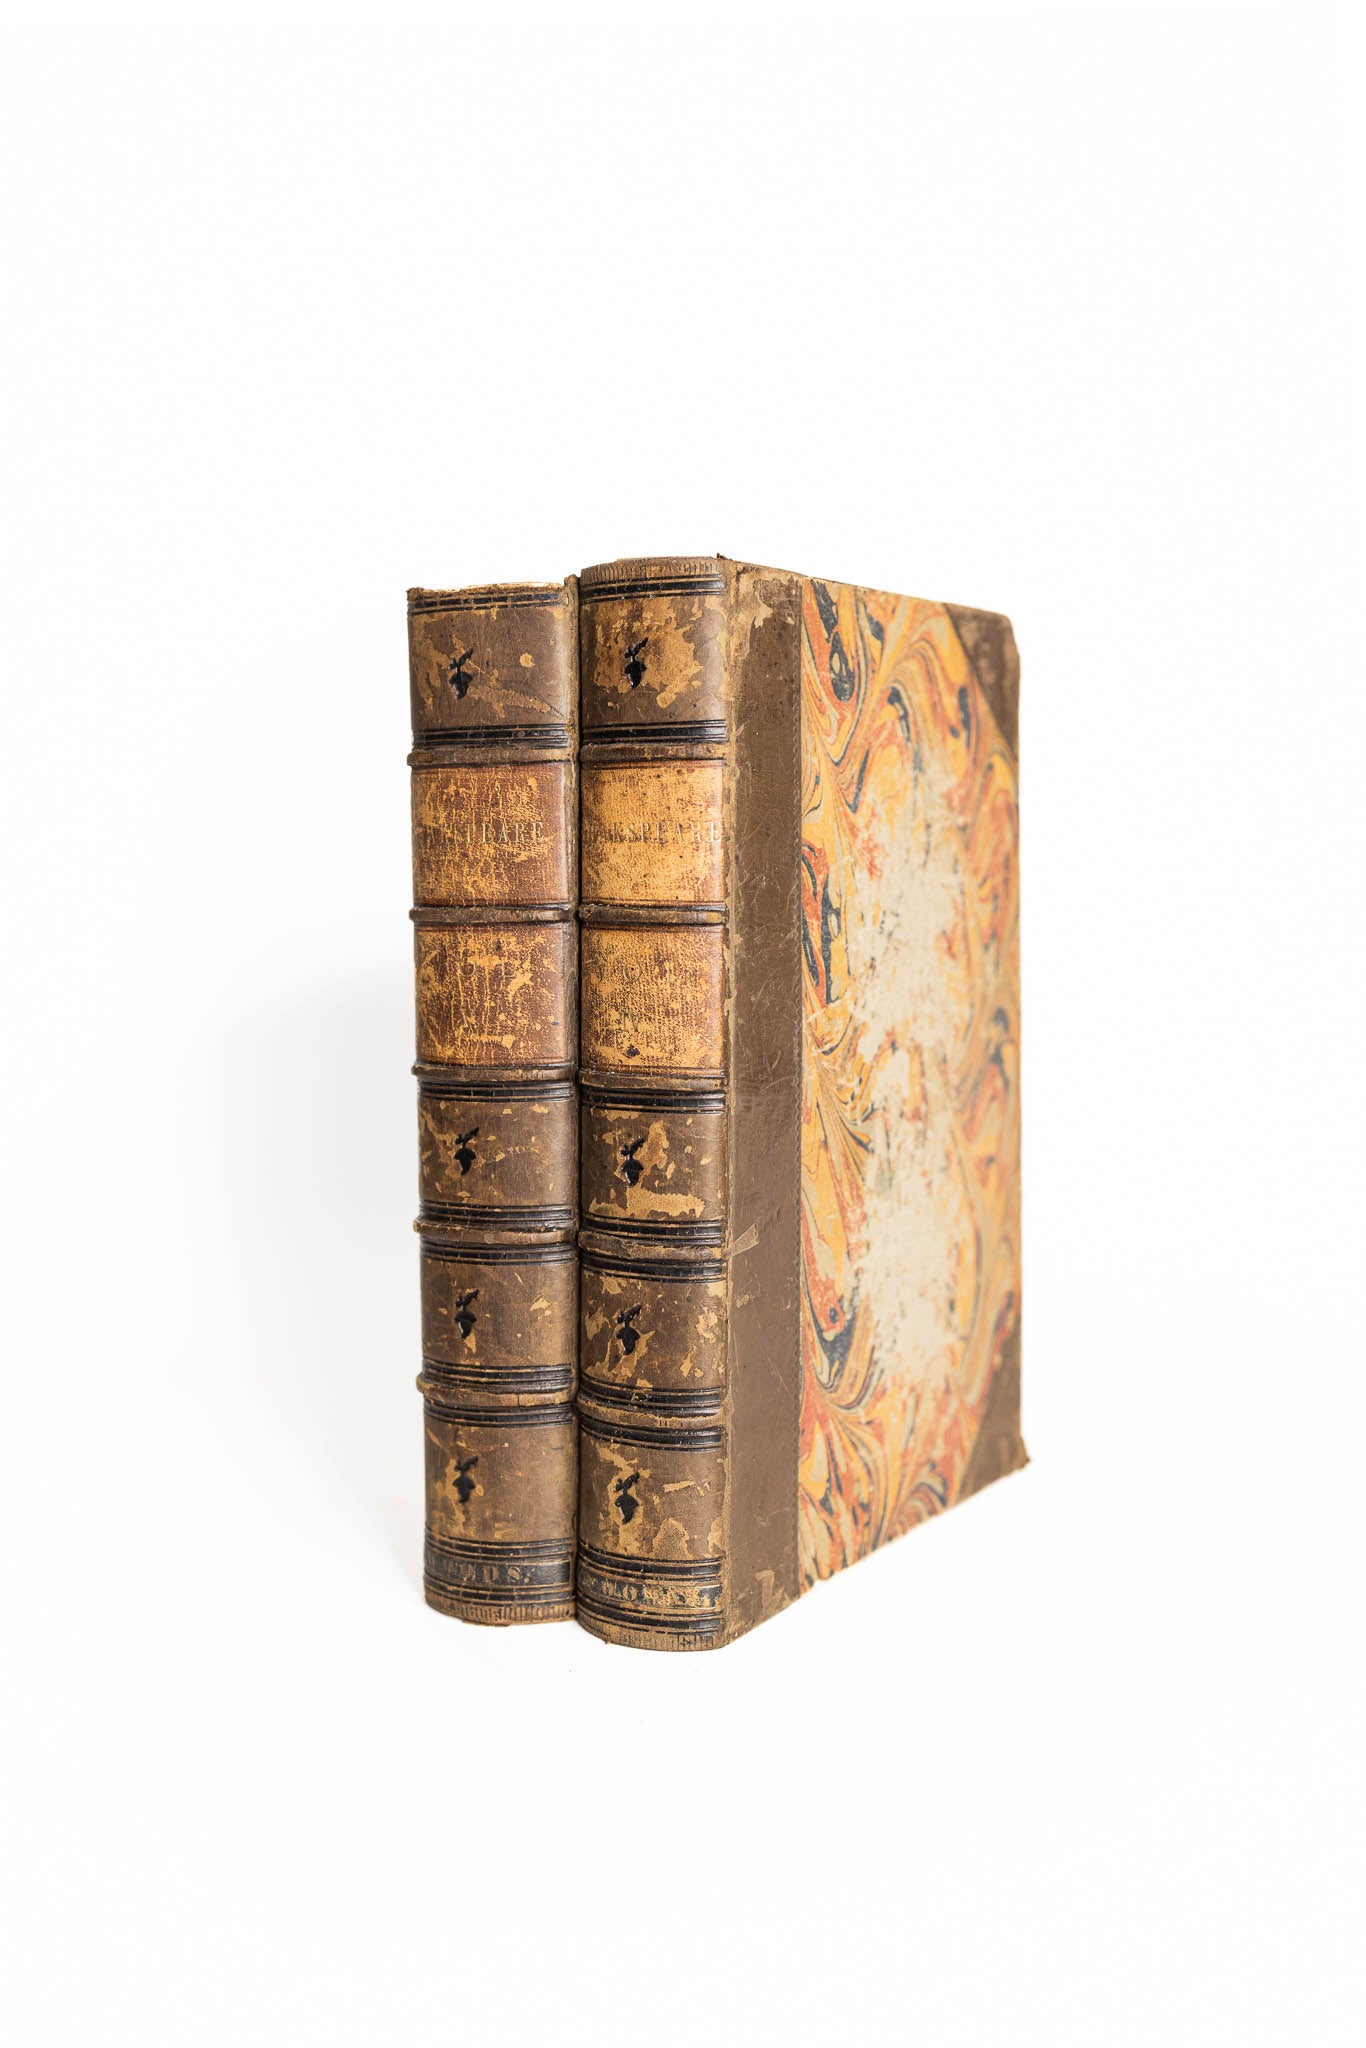 1852 - The Life of William Shakespeare - Set of 2